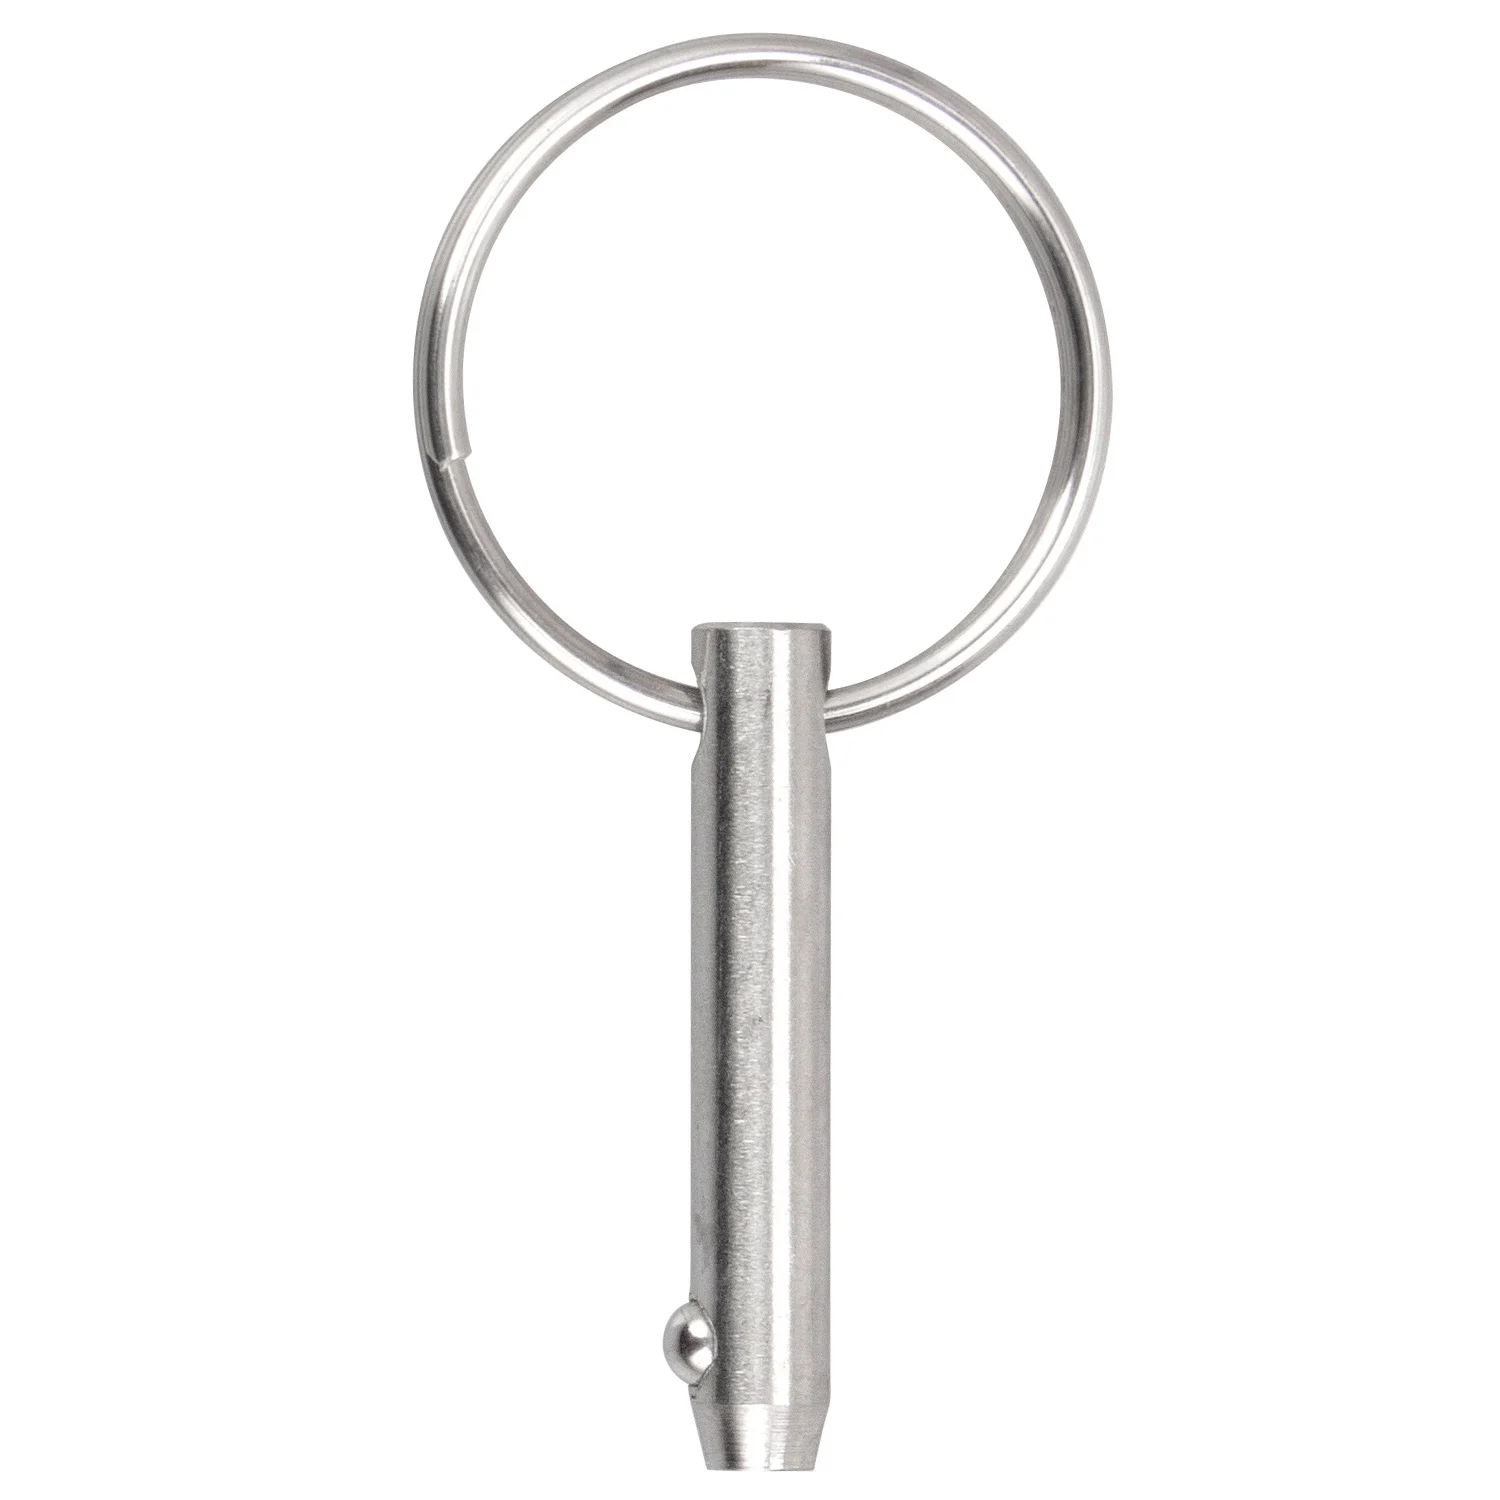 Quick Release Pins 316 Stainless Steel, Bimini Top Pins Diameter 0.25 Inch/6.3mm, Total Length 2 Inch/51mm(Optional 1 or 2) quick release pin bimini top pin total length 2 56 inch 65mm diameter 0 25 inch 6 3mm 316 stainless steel 1 pack